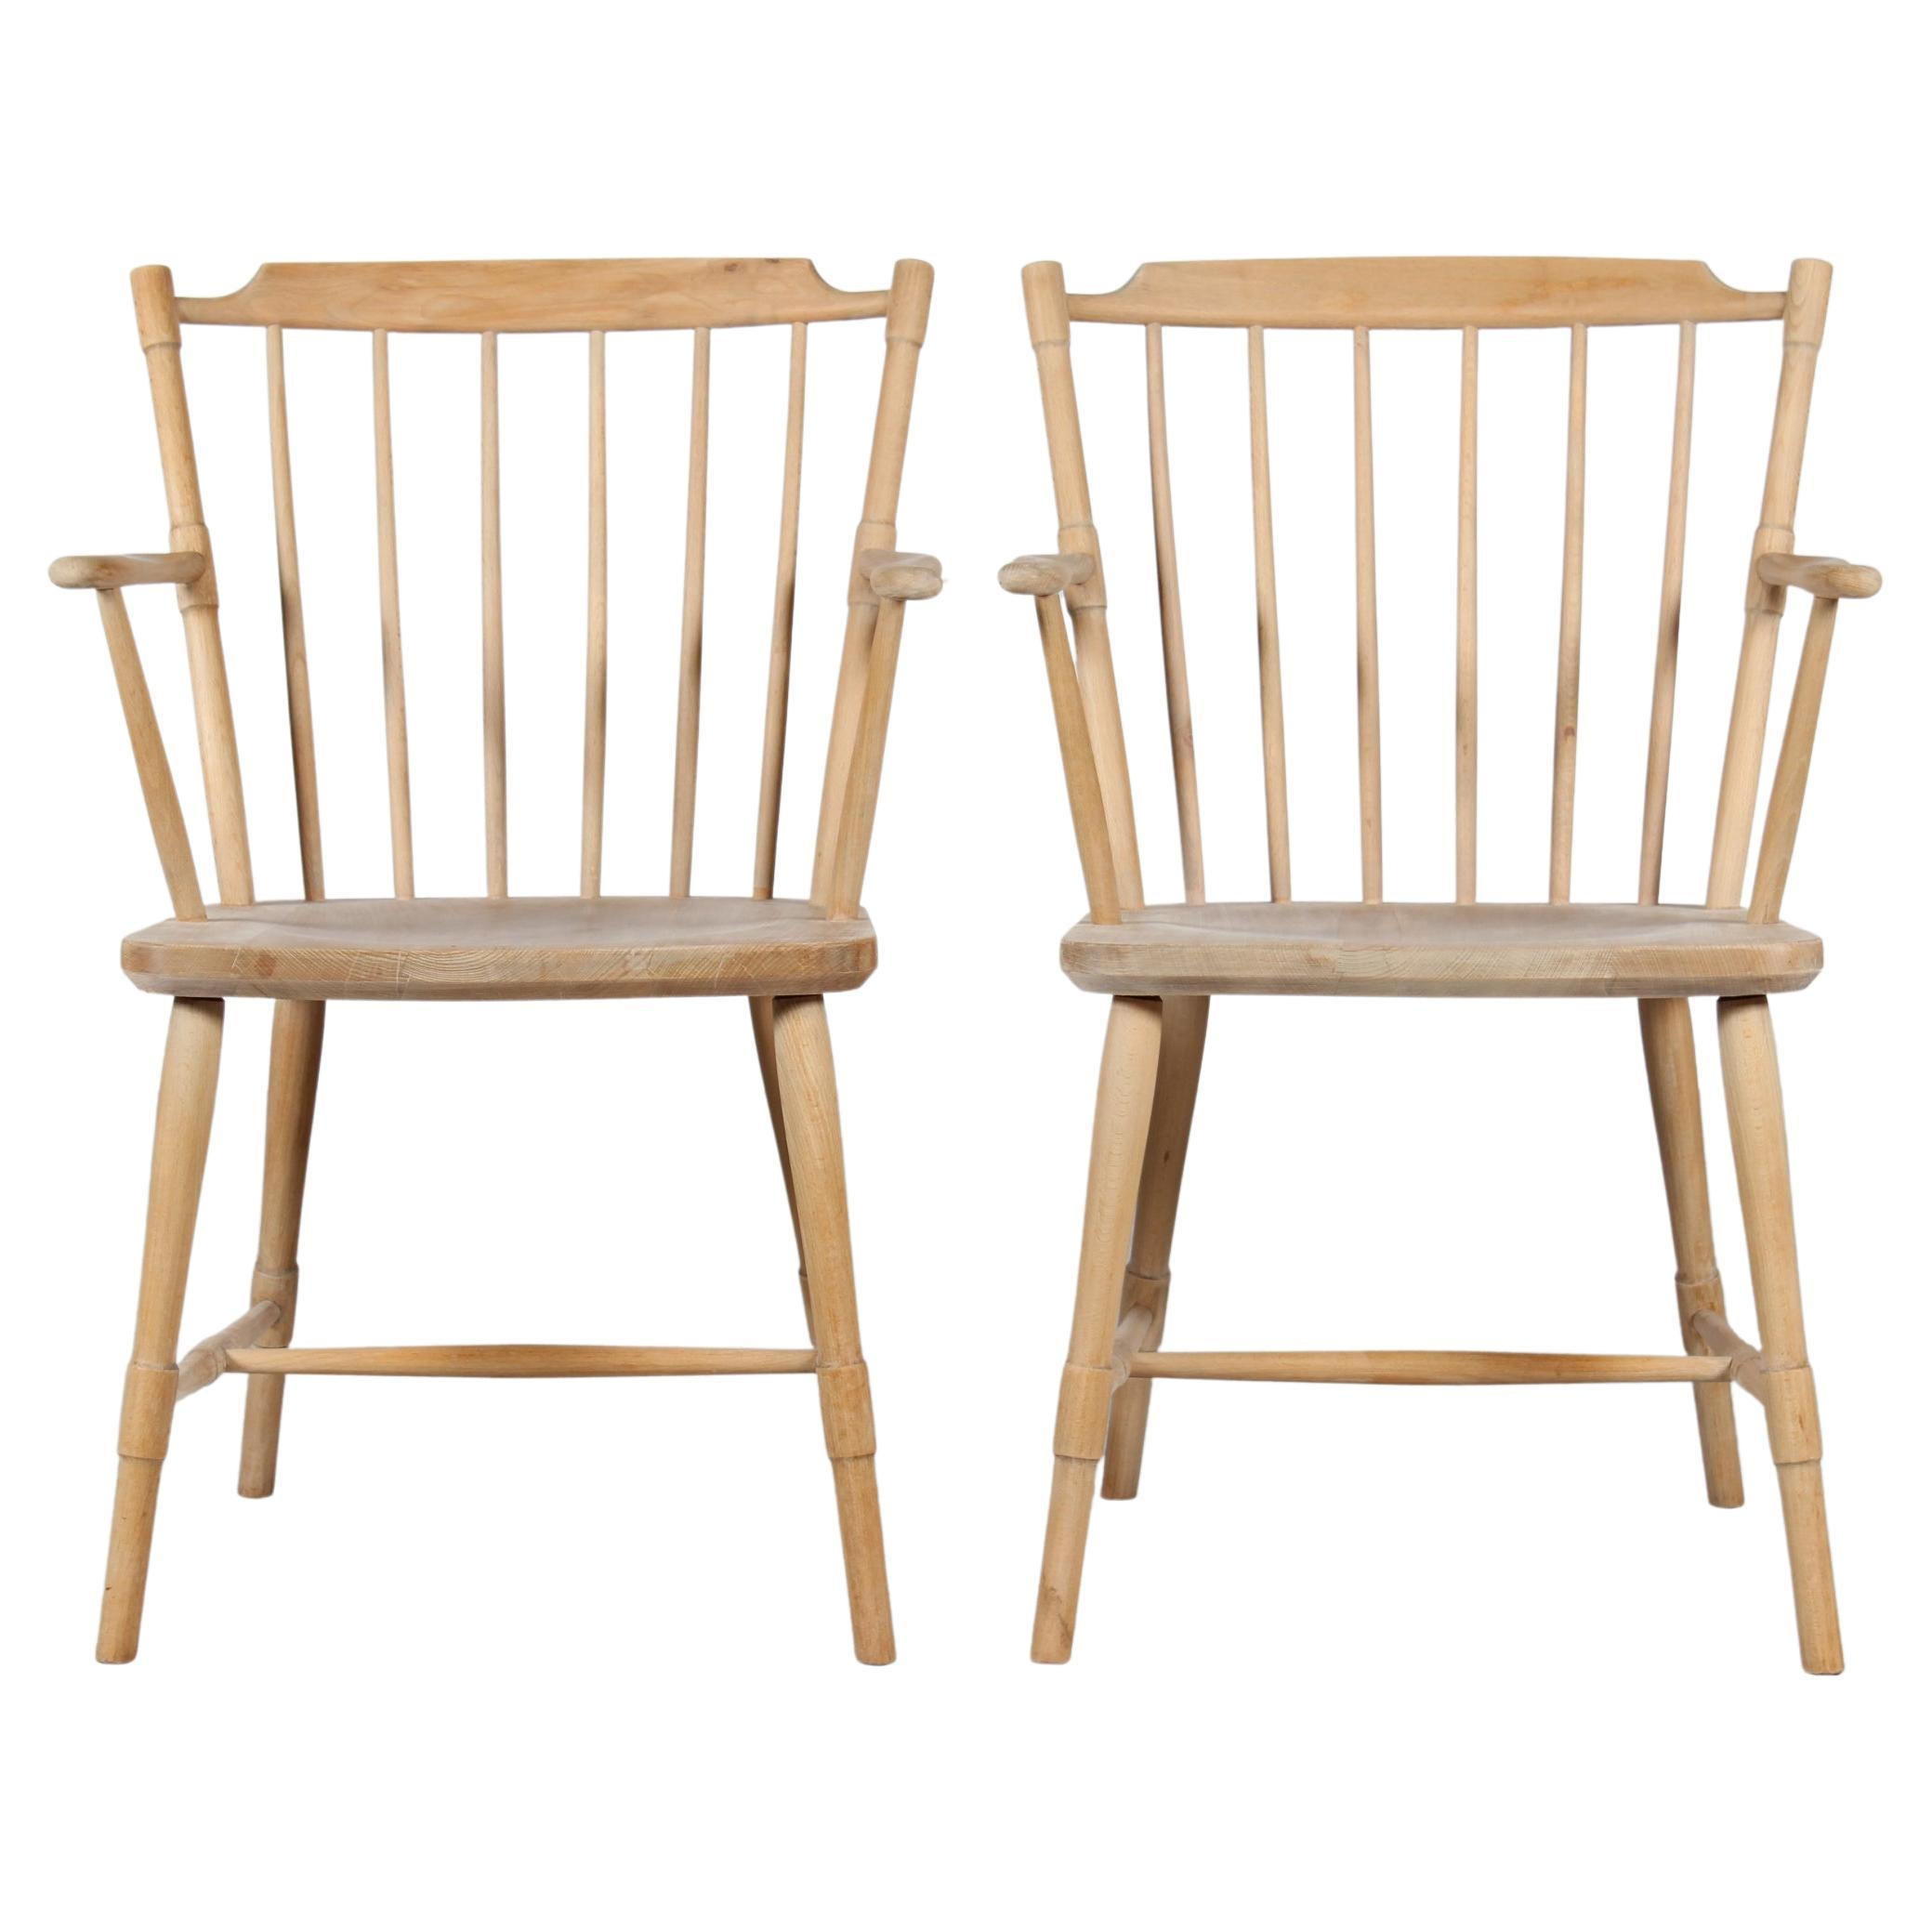 Børge Mogensen Style Pair of Windsor Armchairs of Beech Wood, Denmark, 1970s For Sale